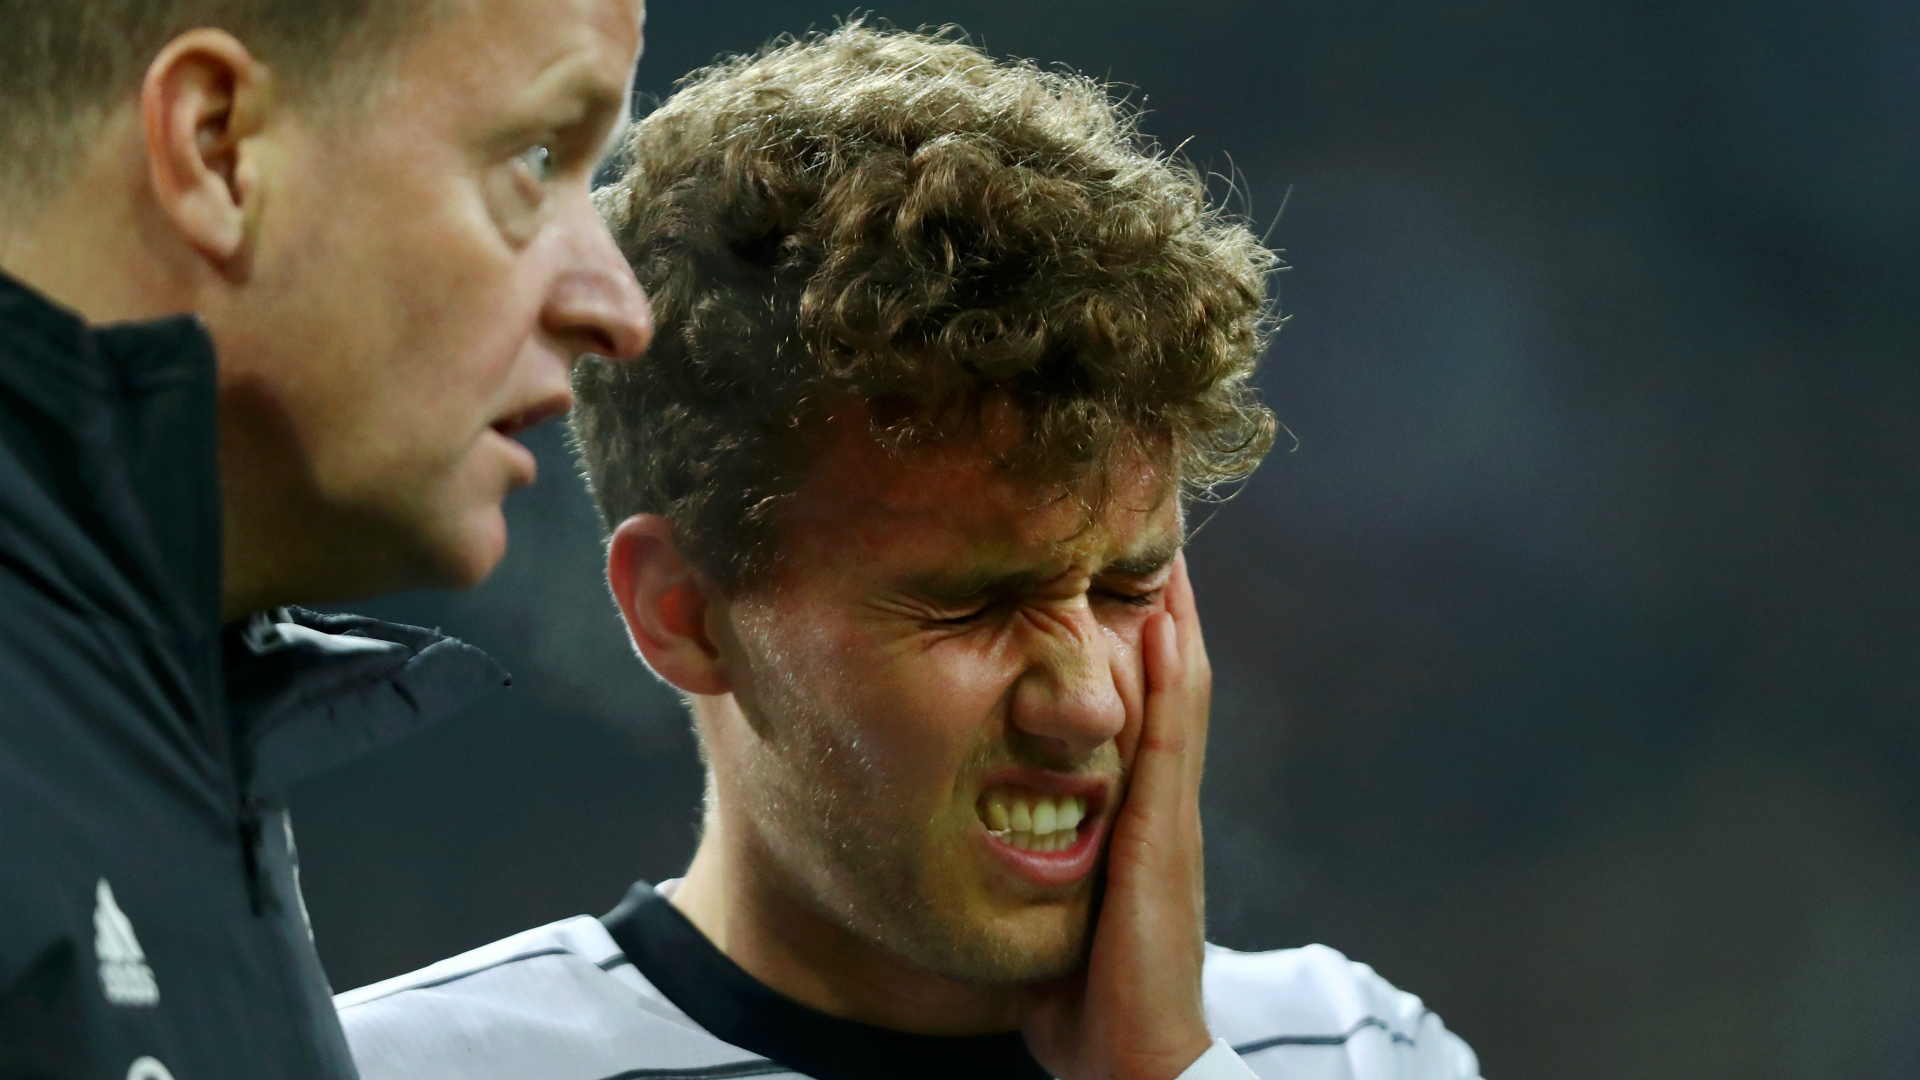 Freiburg forward Luca Waldschmidt was left concussed following a heavy collision in Germany's win over Belarus.